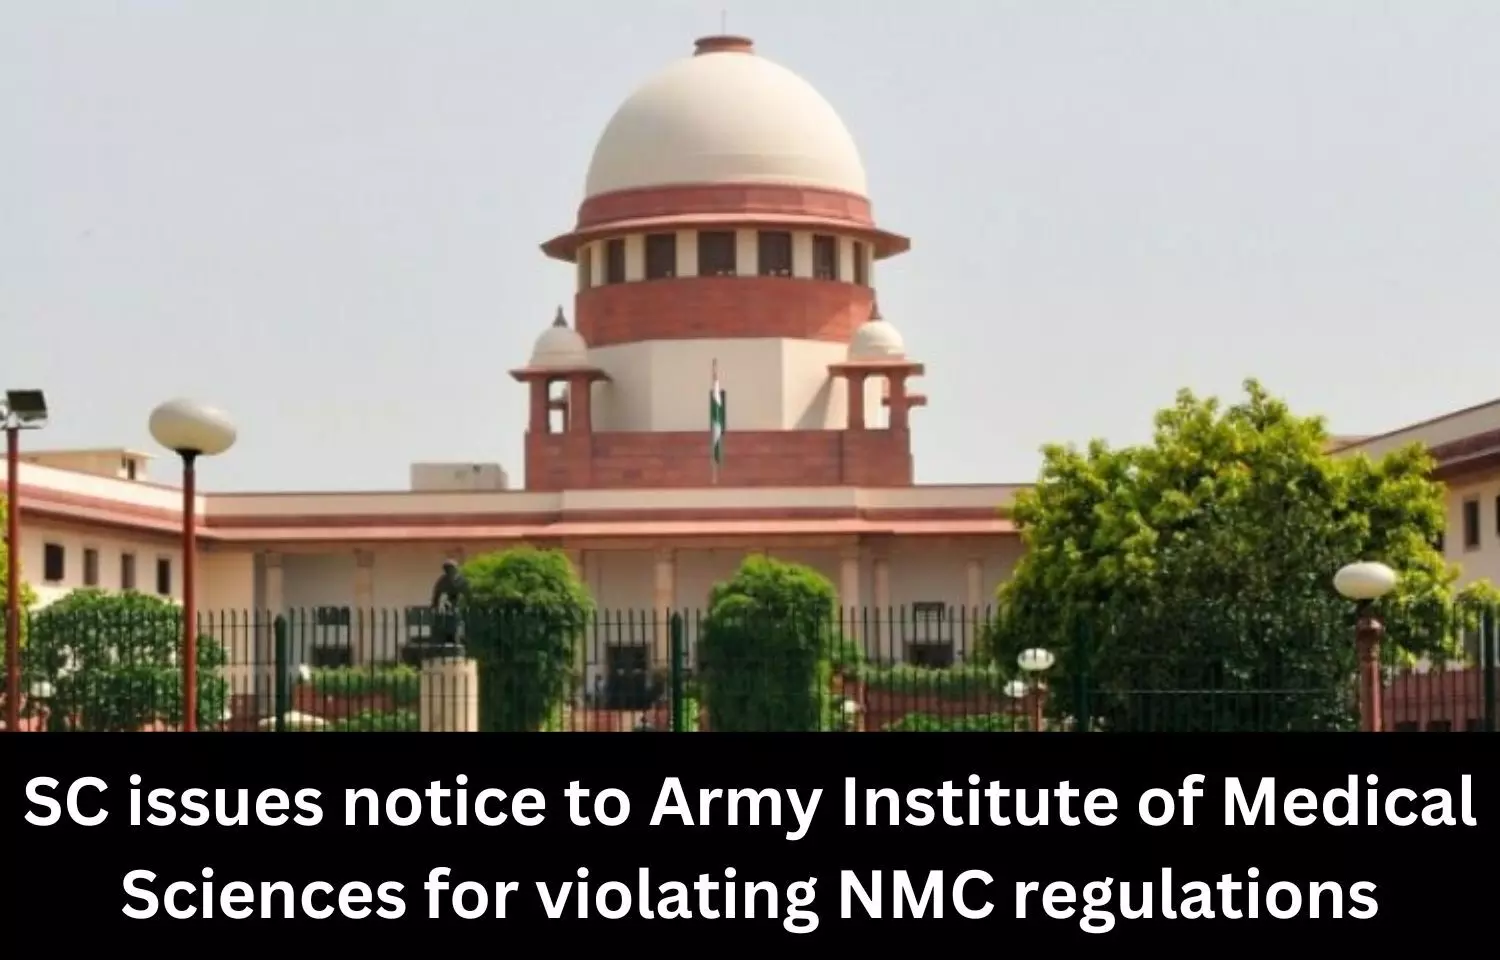 MBBS interns take Army Institute of Medical Sciences to court over non-payment of stipend, SC issues notice to college for violating NMC regulations